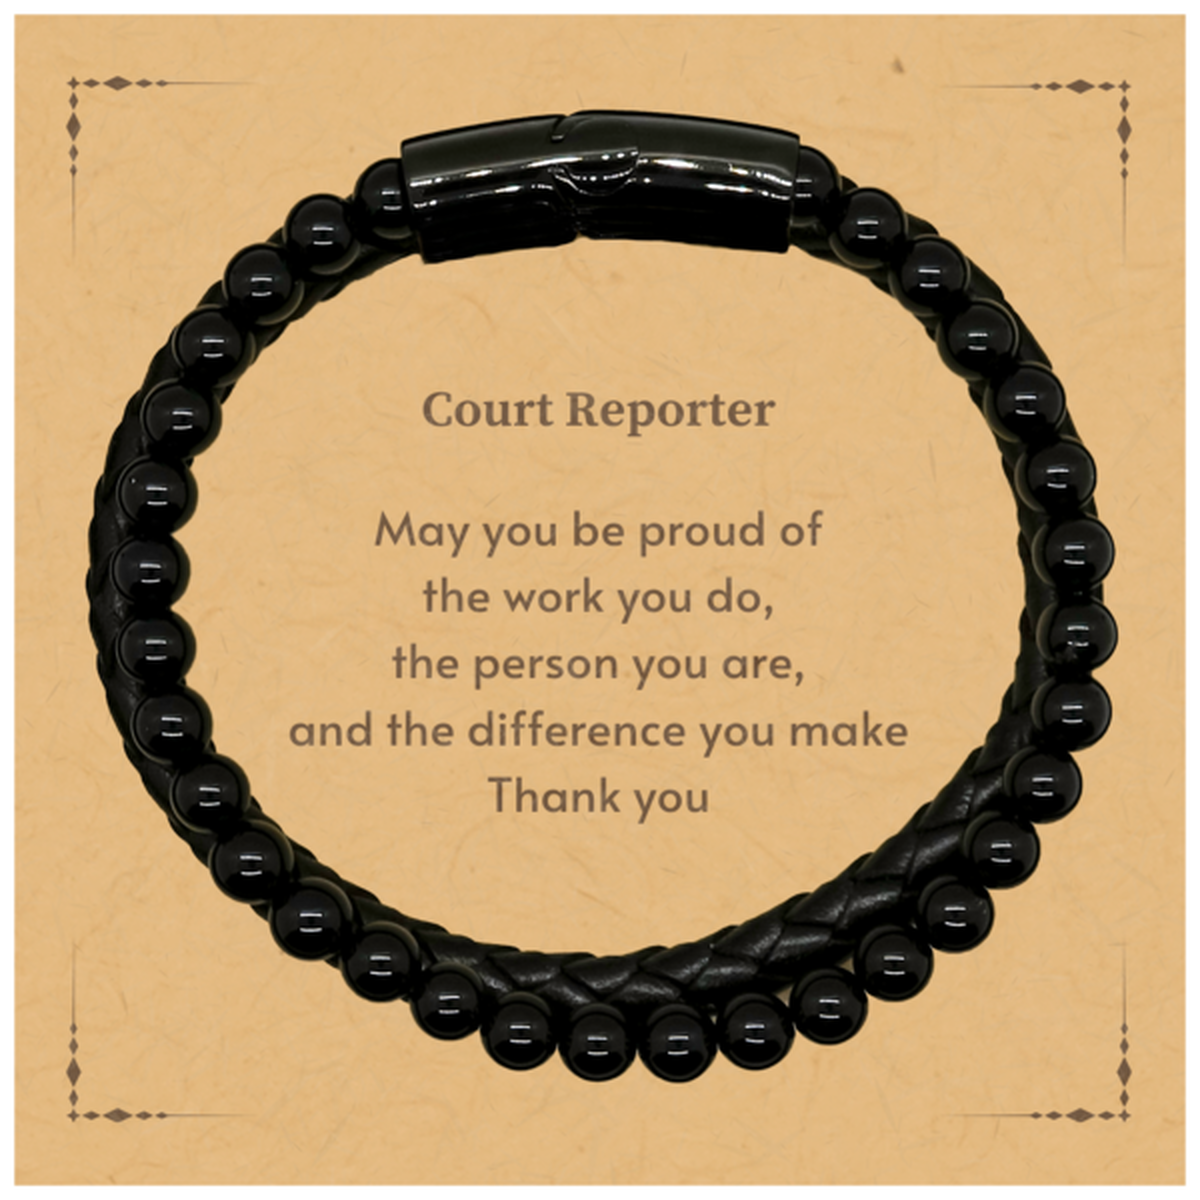 Heartwarming Stone Leather Bracelets Retirement Coworkers Gifts for Court Reporter, Court Reporter May You be proud of the work you do, the person you are Gifts for Boss Men Women Friends